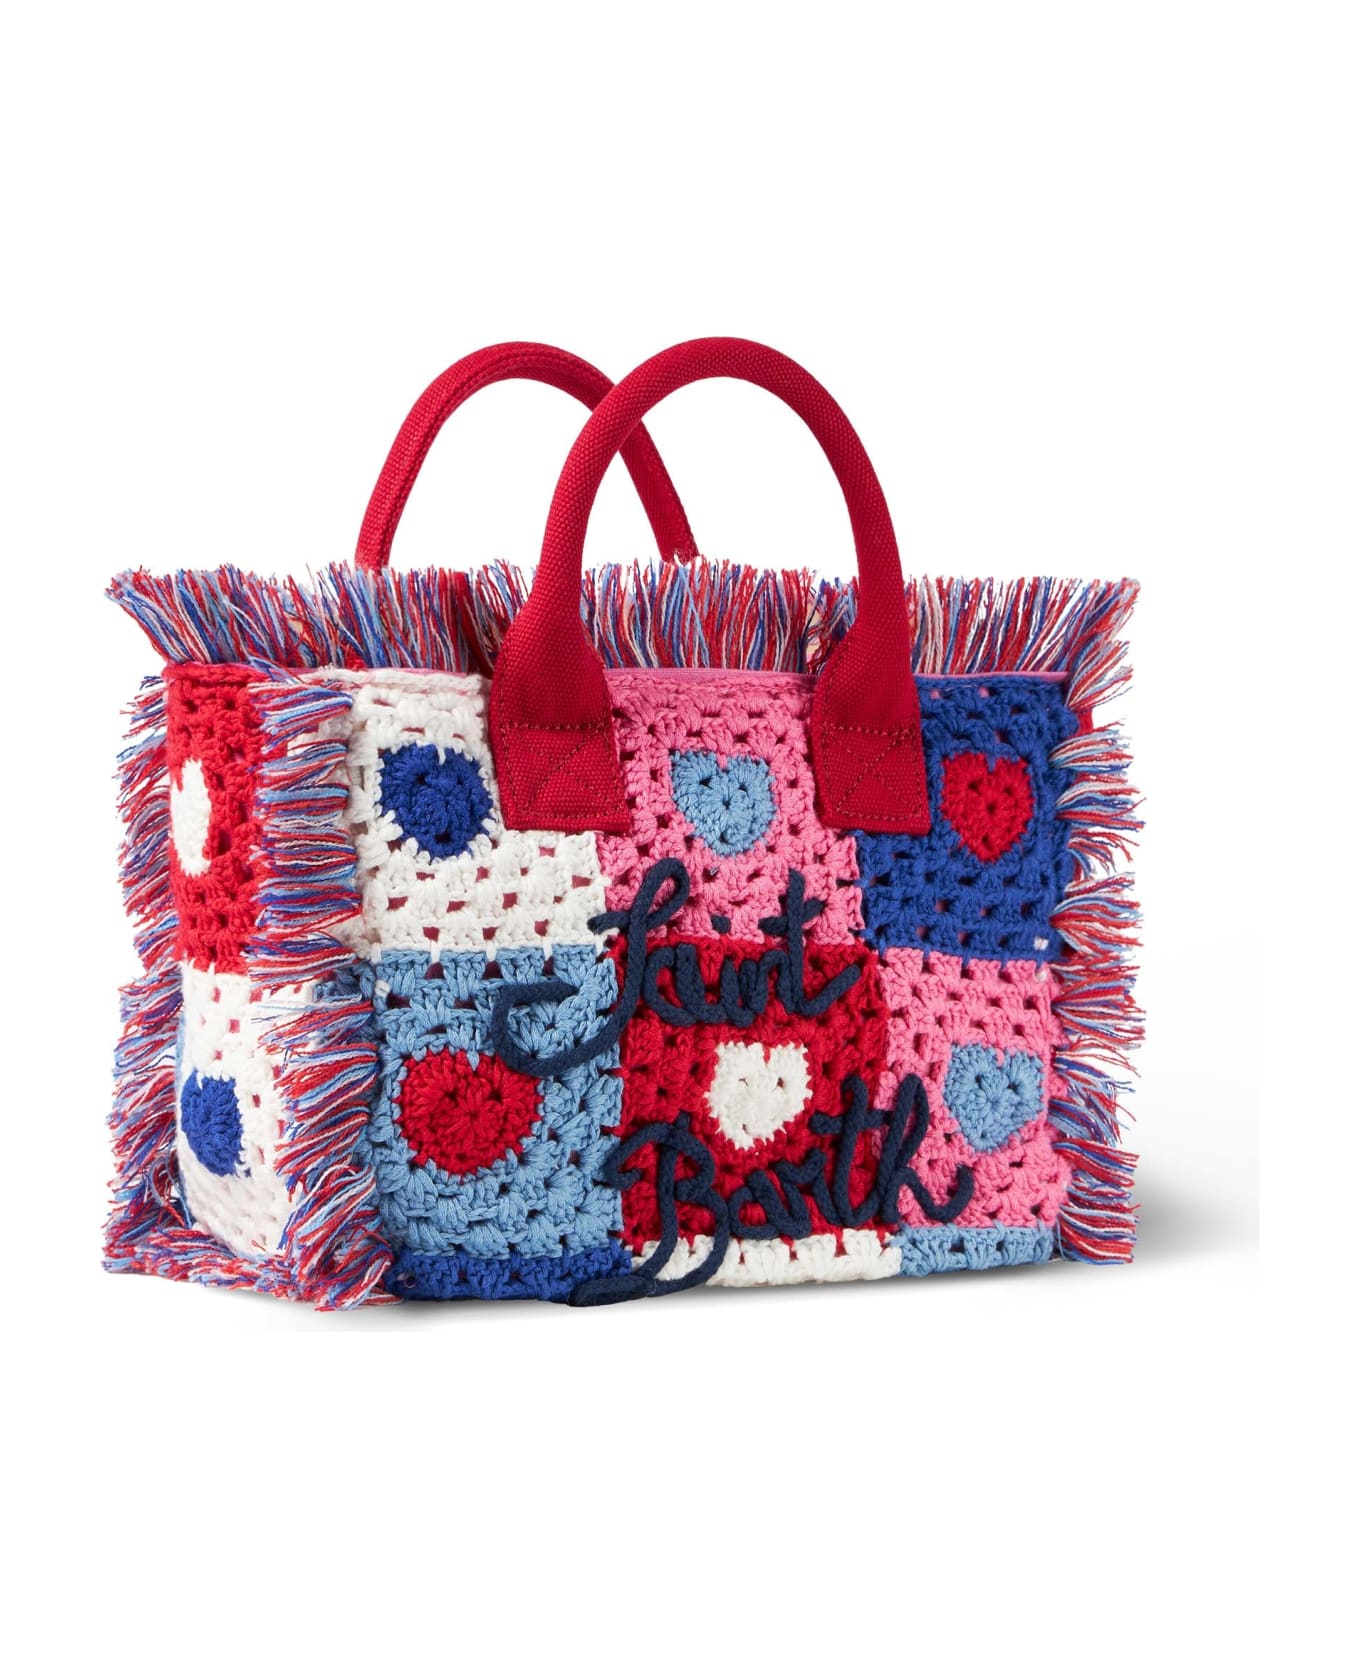 MC2 Saint Barth Colette Handbag With Crochet Heart Patches - RED